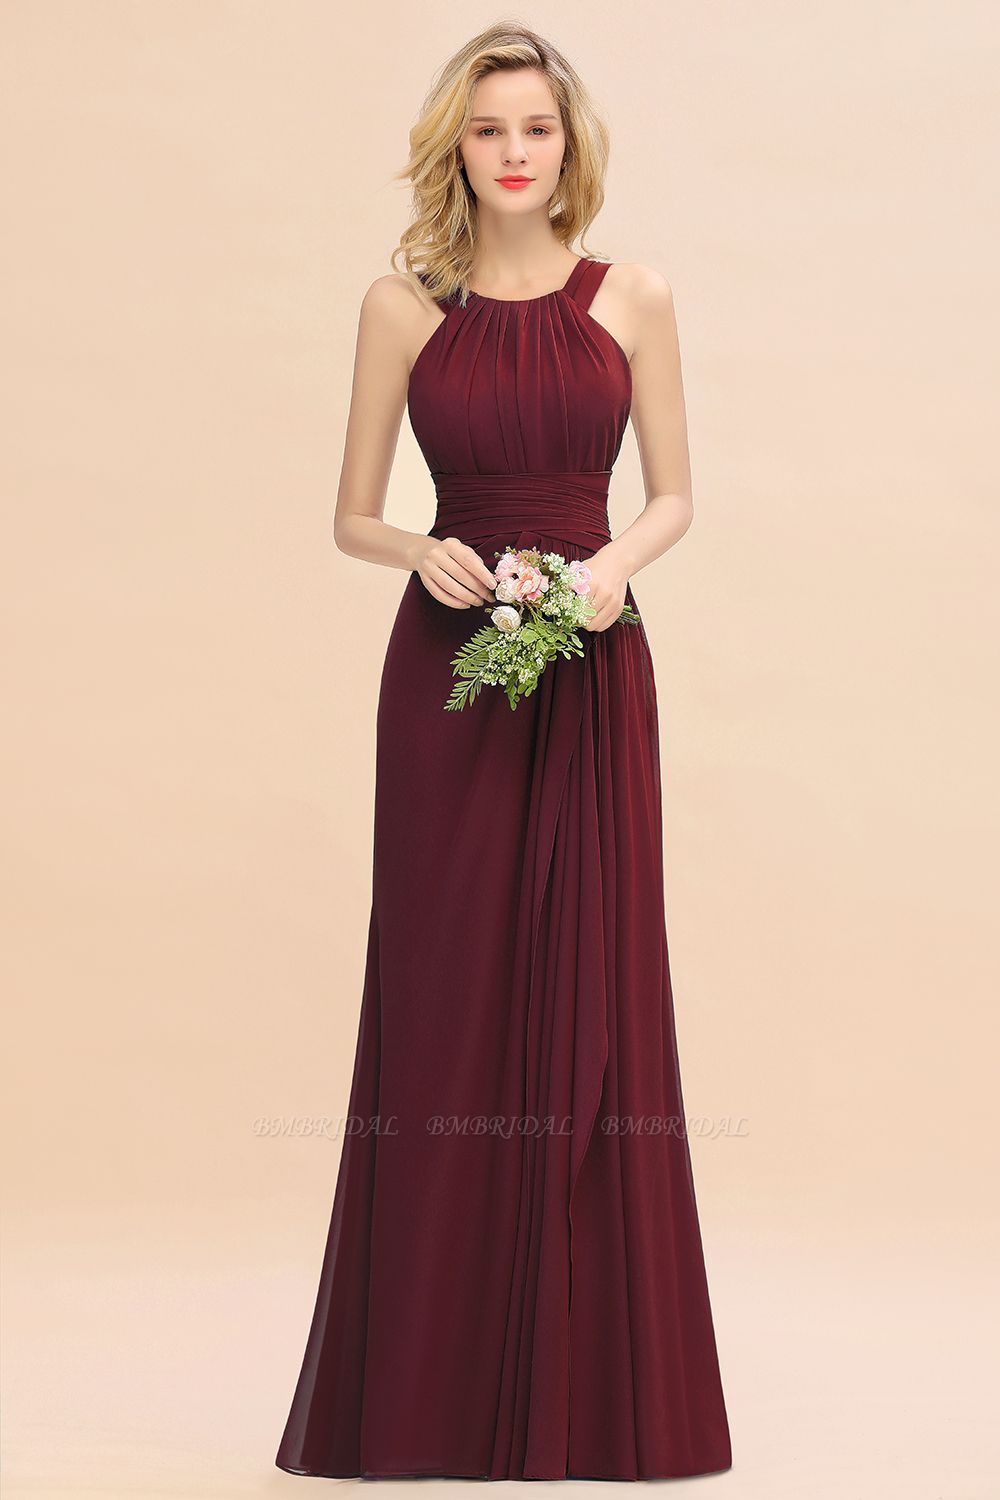 Burgundy Bridesmaid Dresses Are Perfect for A Fall Wedding In 2019